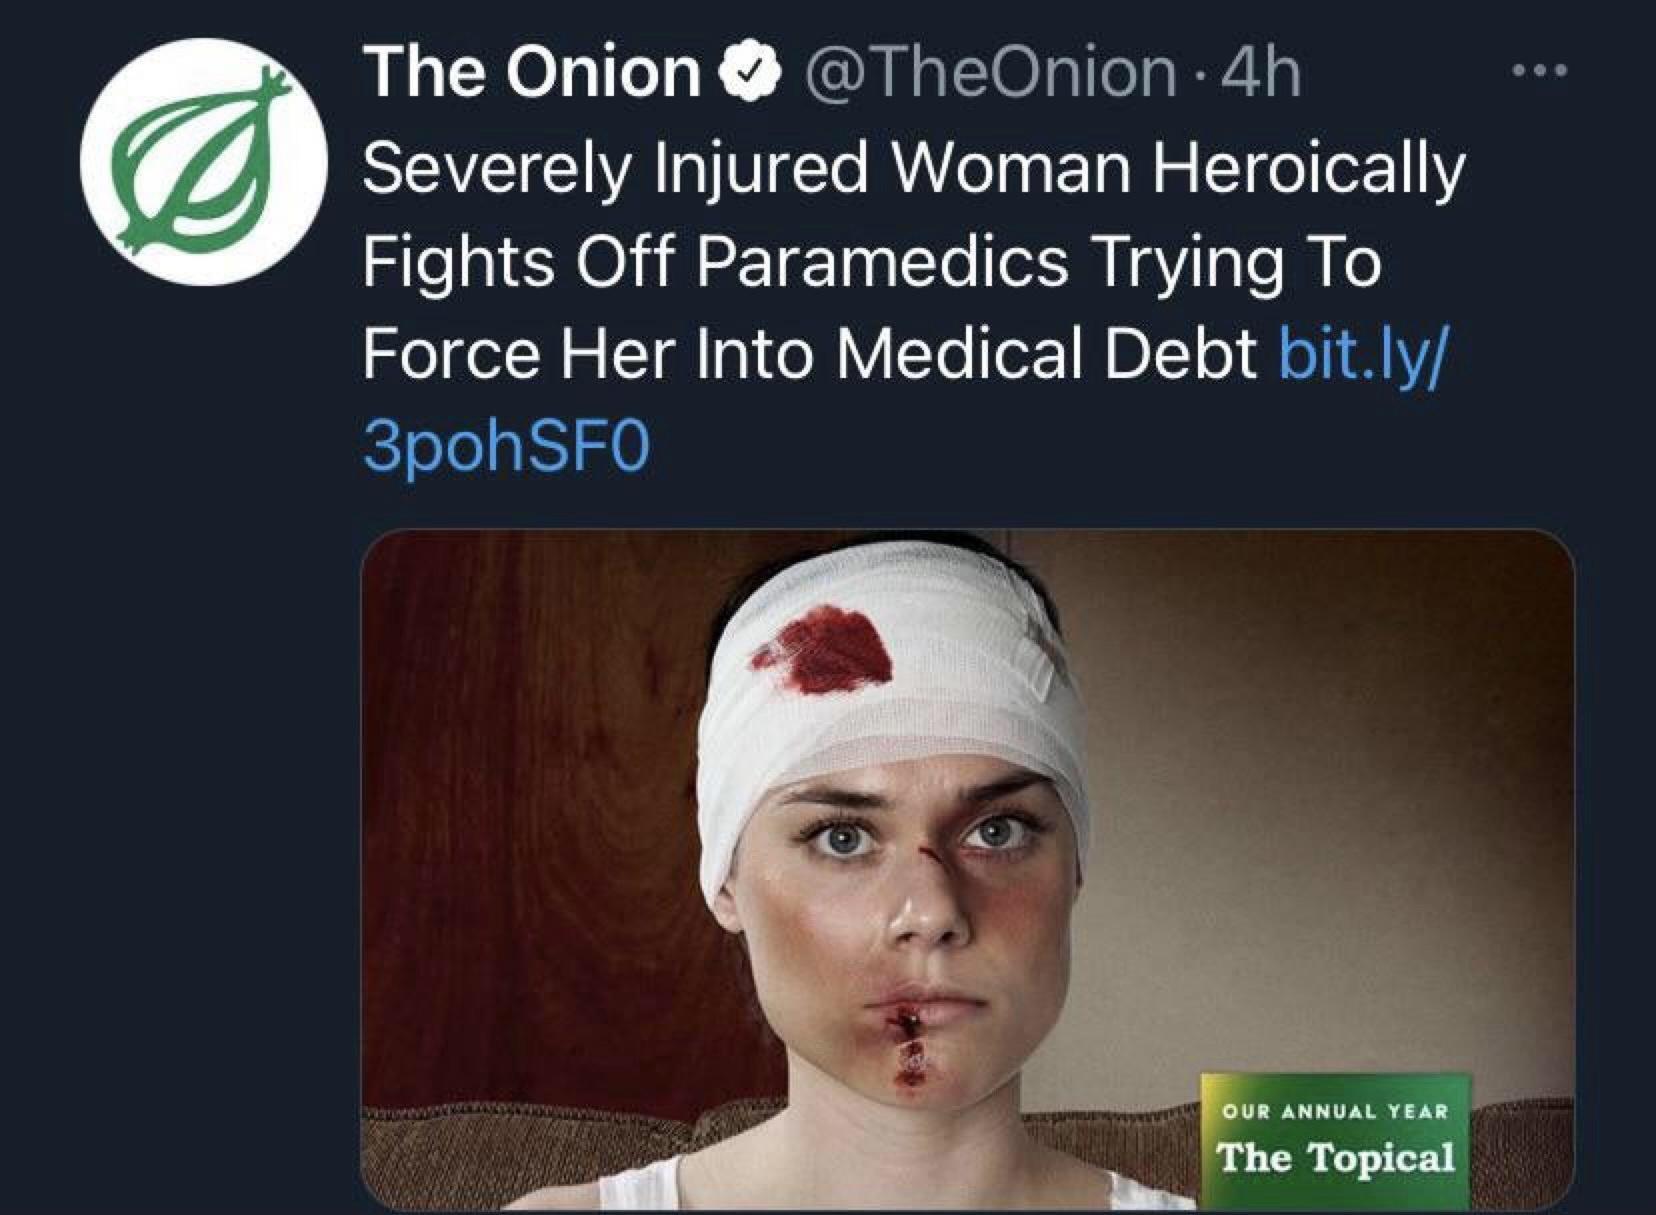 head - The Onion 4h Severely Injured Woman Heroically Fights Off Paramedics Trying To Force Her Into Medical Debt bit.ly 3poh Sfo Our Annual Year The Topical